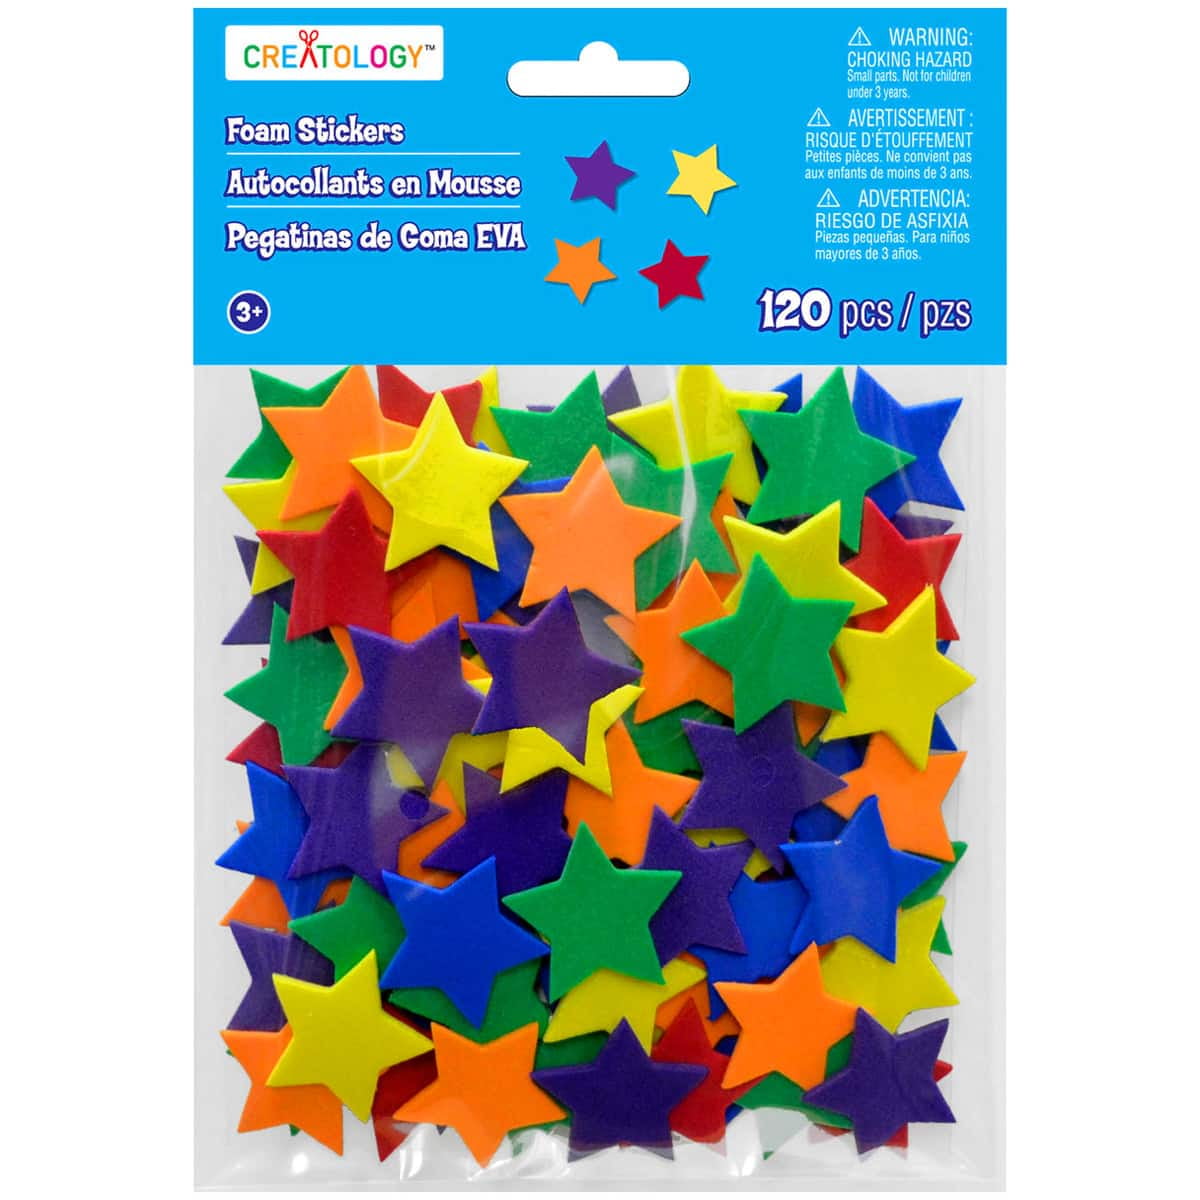 12 Packs: 120 ct. (1,440 total) Star Foam Stickers by Creatology™